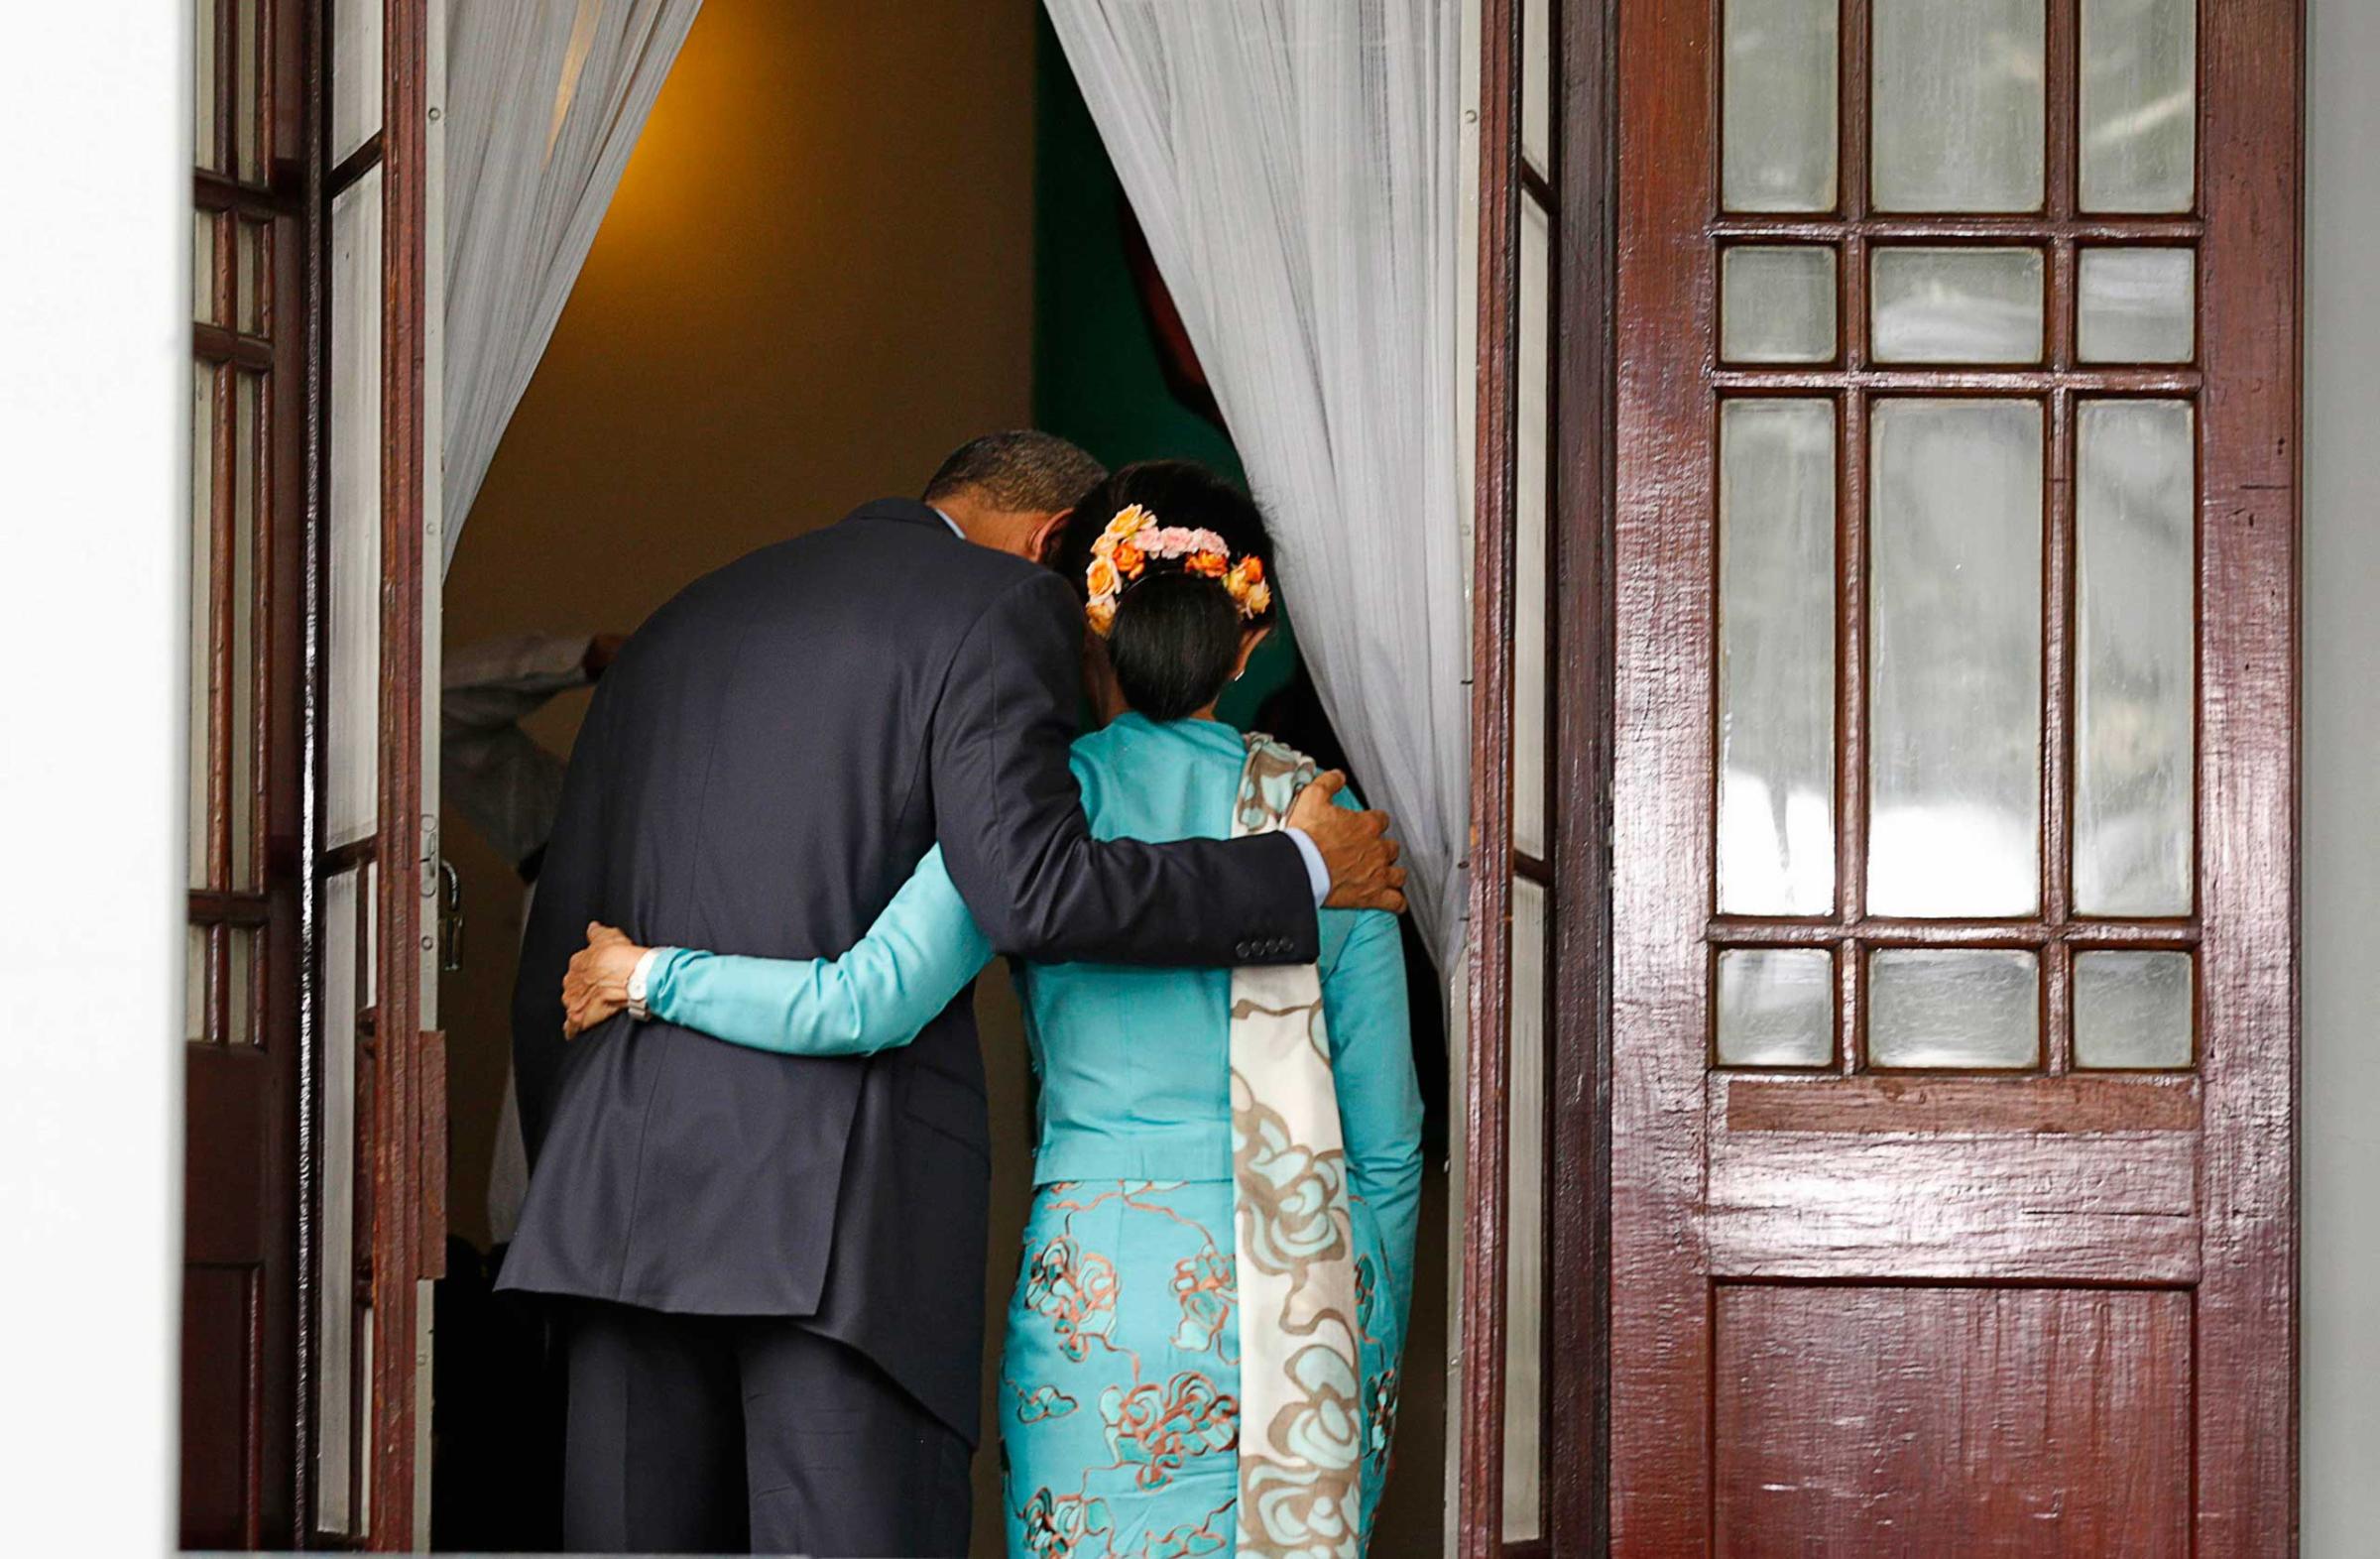 U.S. President Barack Obama puts his arm around opposition politician Aung San Suu Kyi after a joint press conference following their meeting at her residence in Yangon